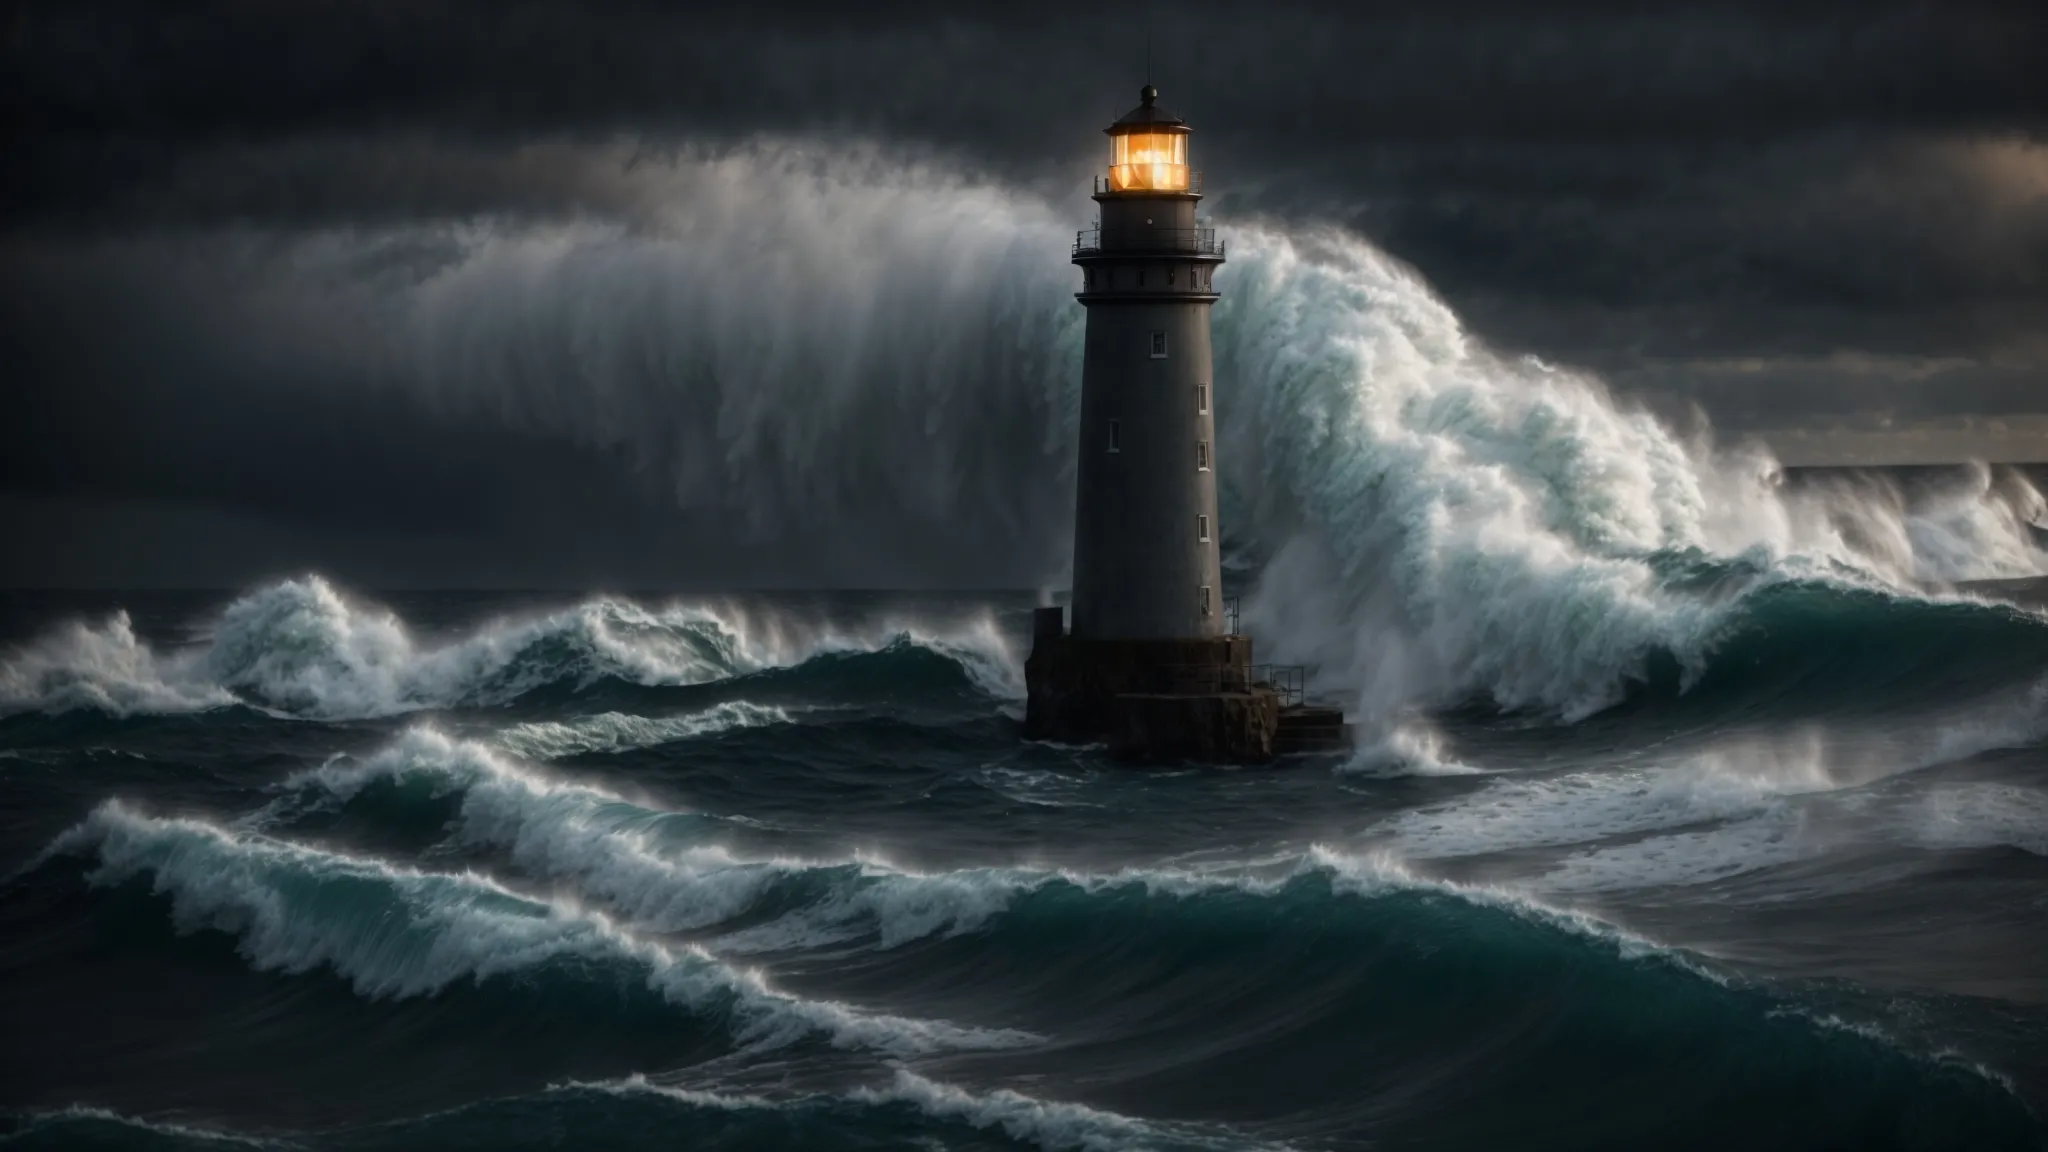 a lighthouse illuminating a path through dark, stormy seas for distant ships.